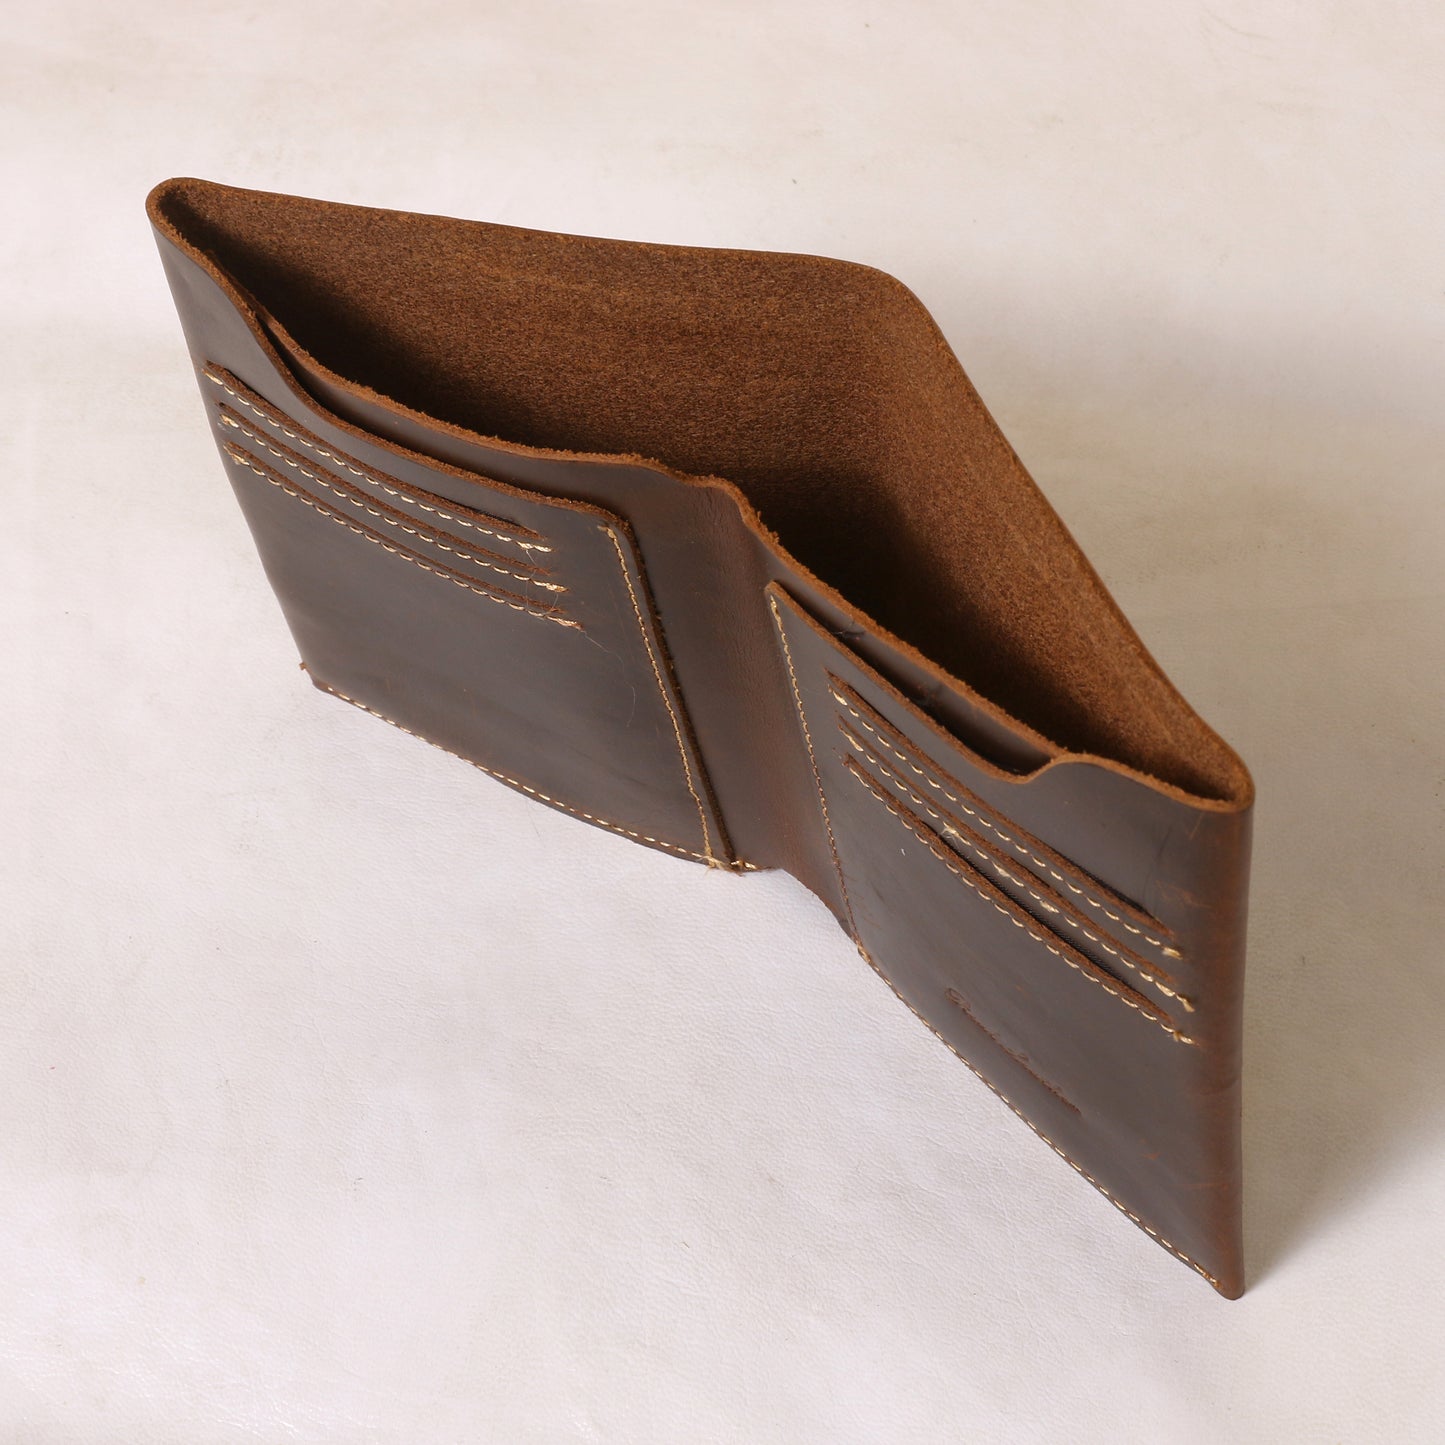 Original Leather Wallets For Men Women Brown Color With Multi Compartment Foldable Wallet